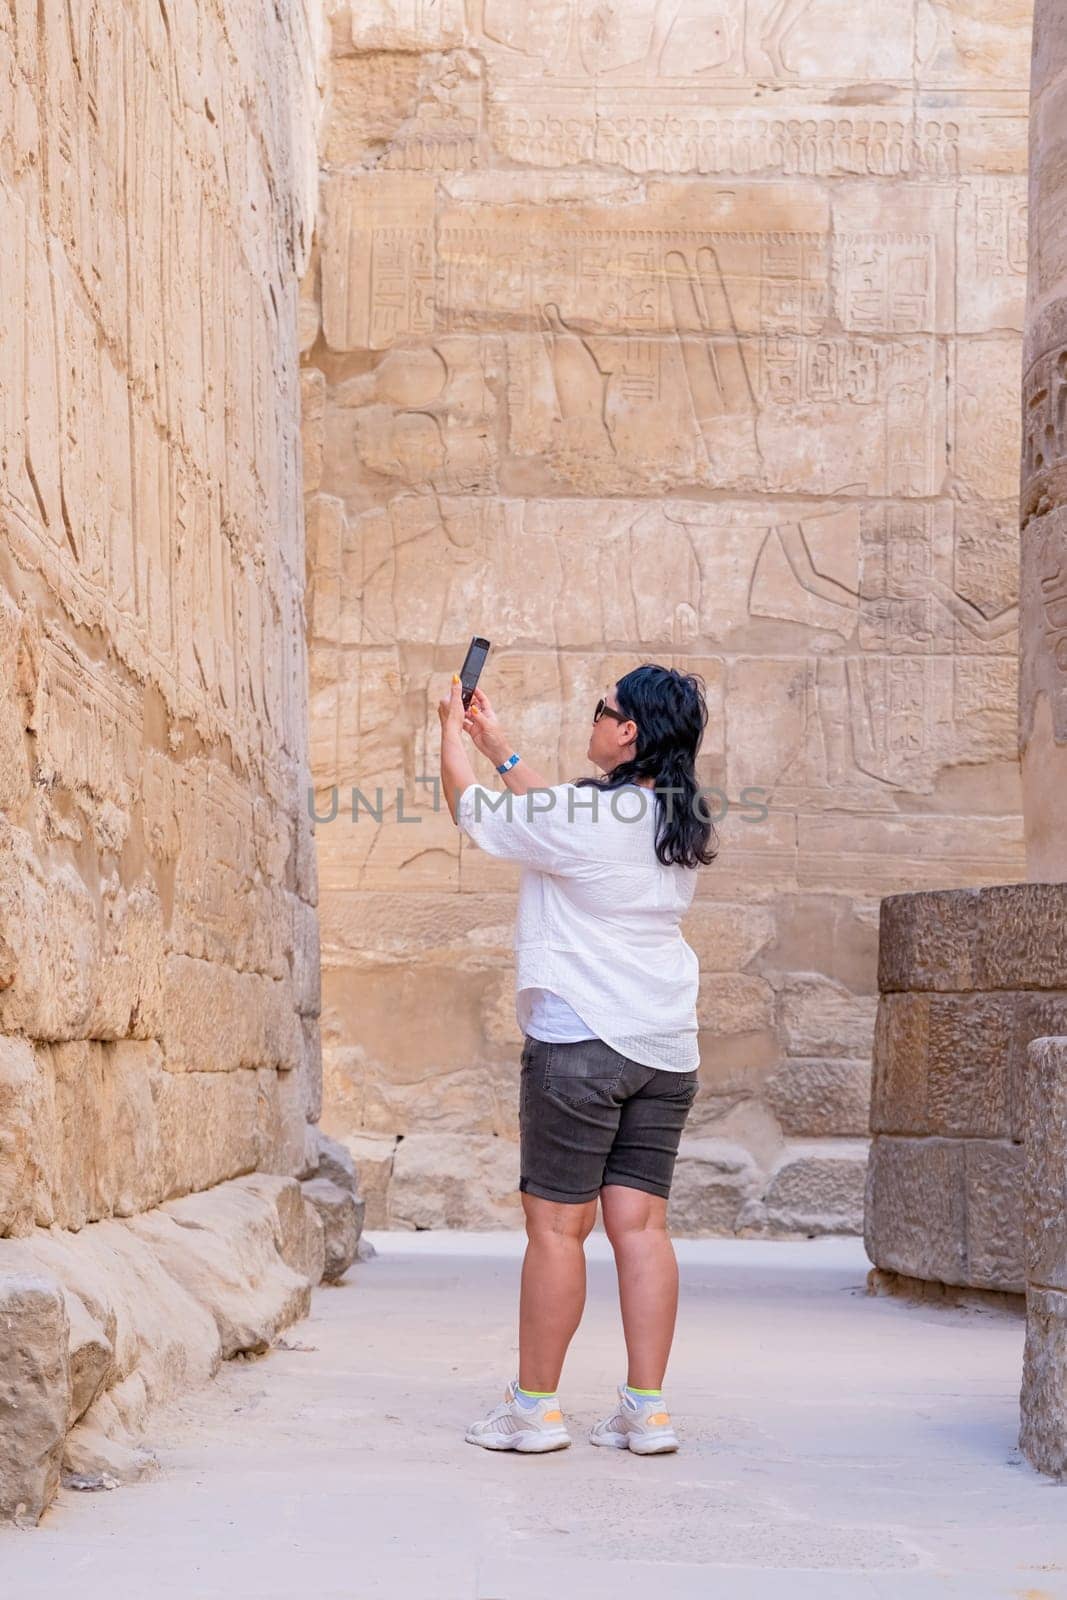 mature adult woman traveler explores the ruins of the ancient Karnak temple in the city of Luxor in Egypt, taking photo using smartphone. Great row of columns with carved hieroglyph